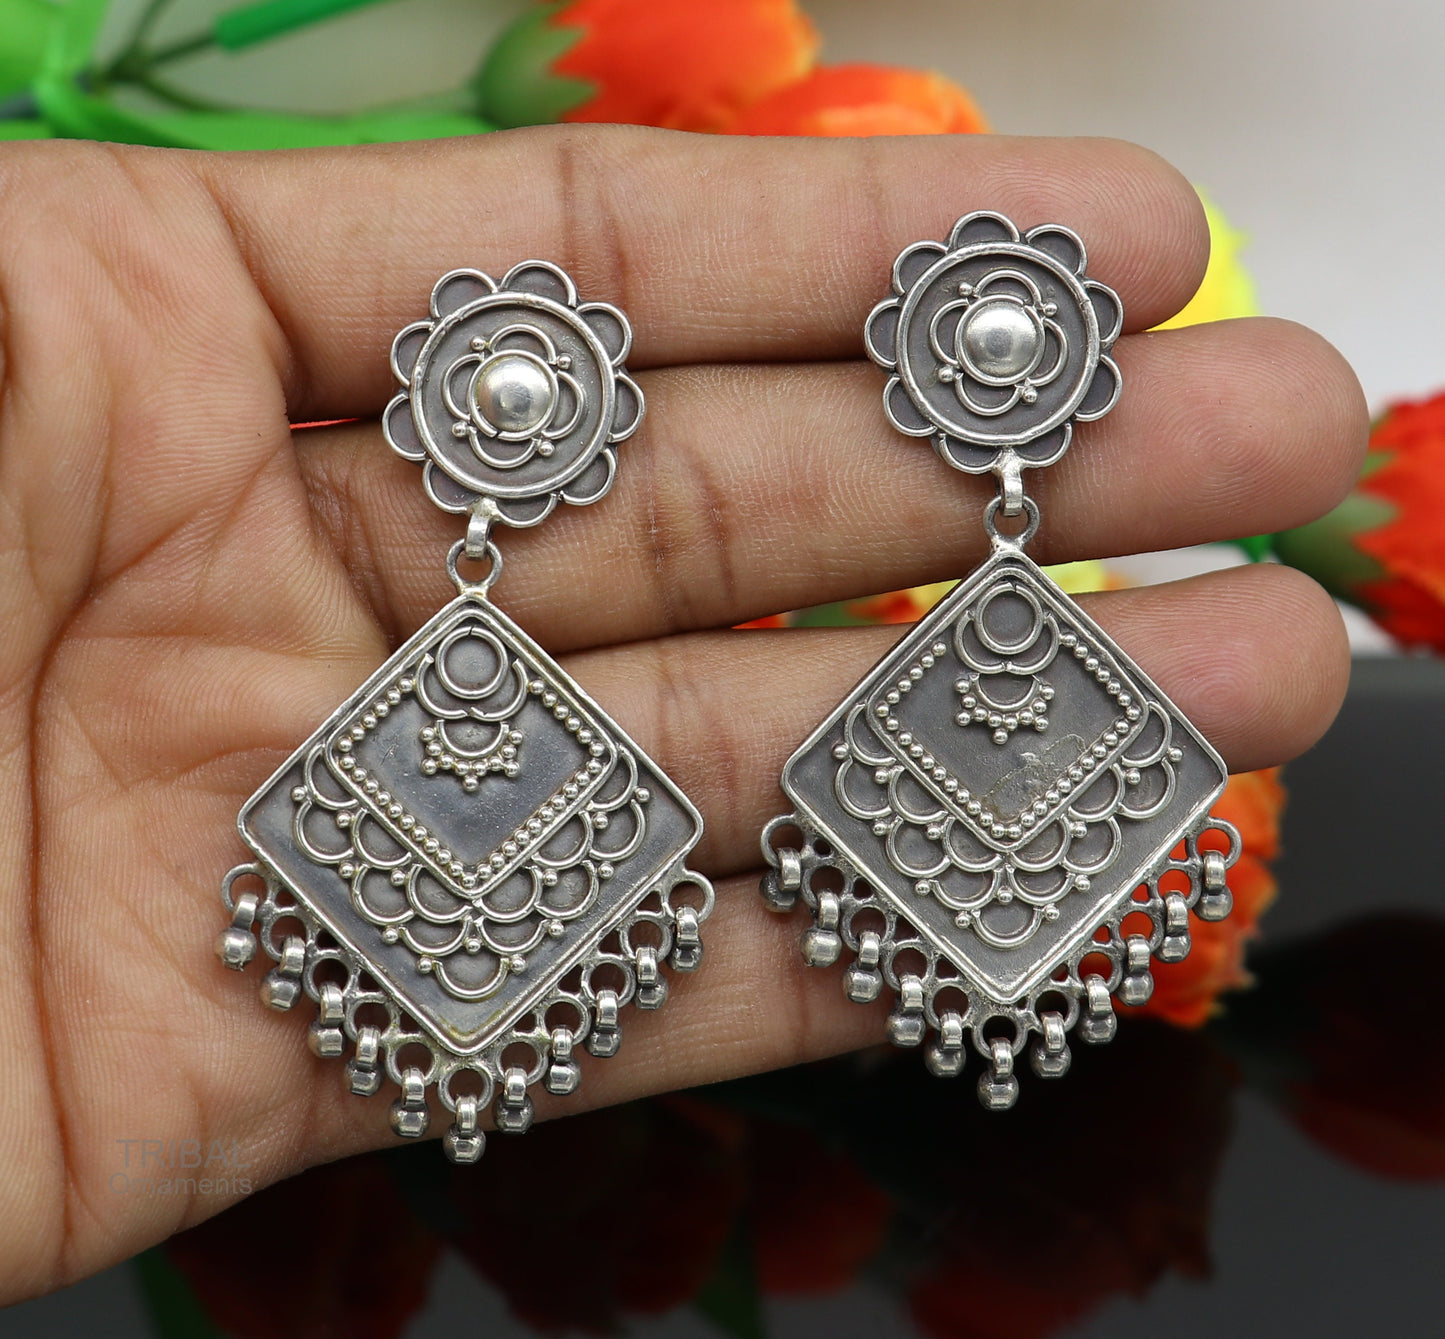 925 sterling silver handmade vintage antique ethnic design customized stud earring gorgeous hanging drops tribal earrings s962 - TRIBAL ORNAMENTS